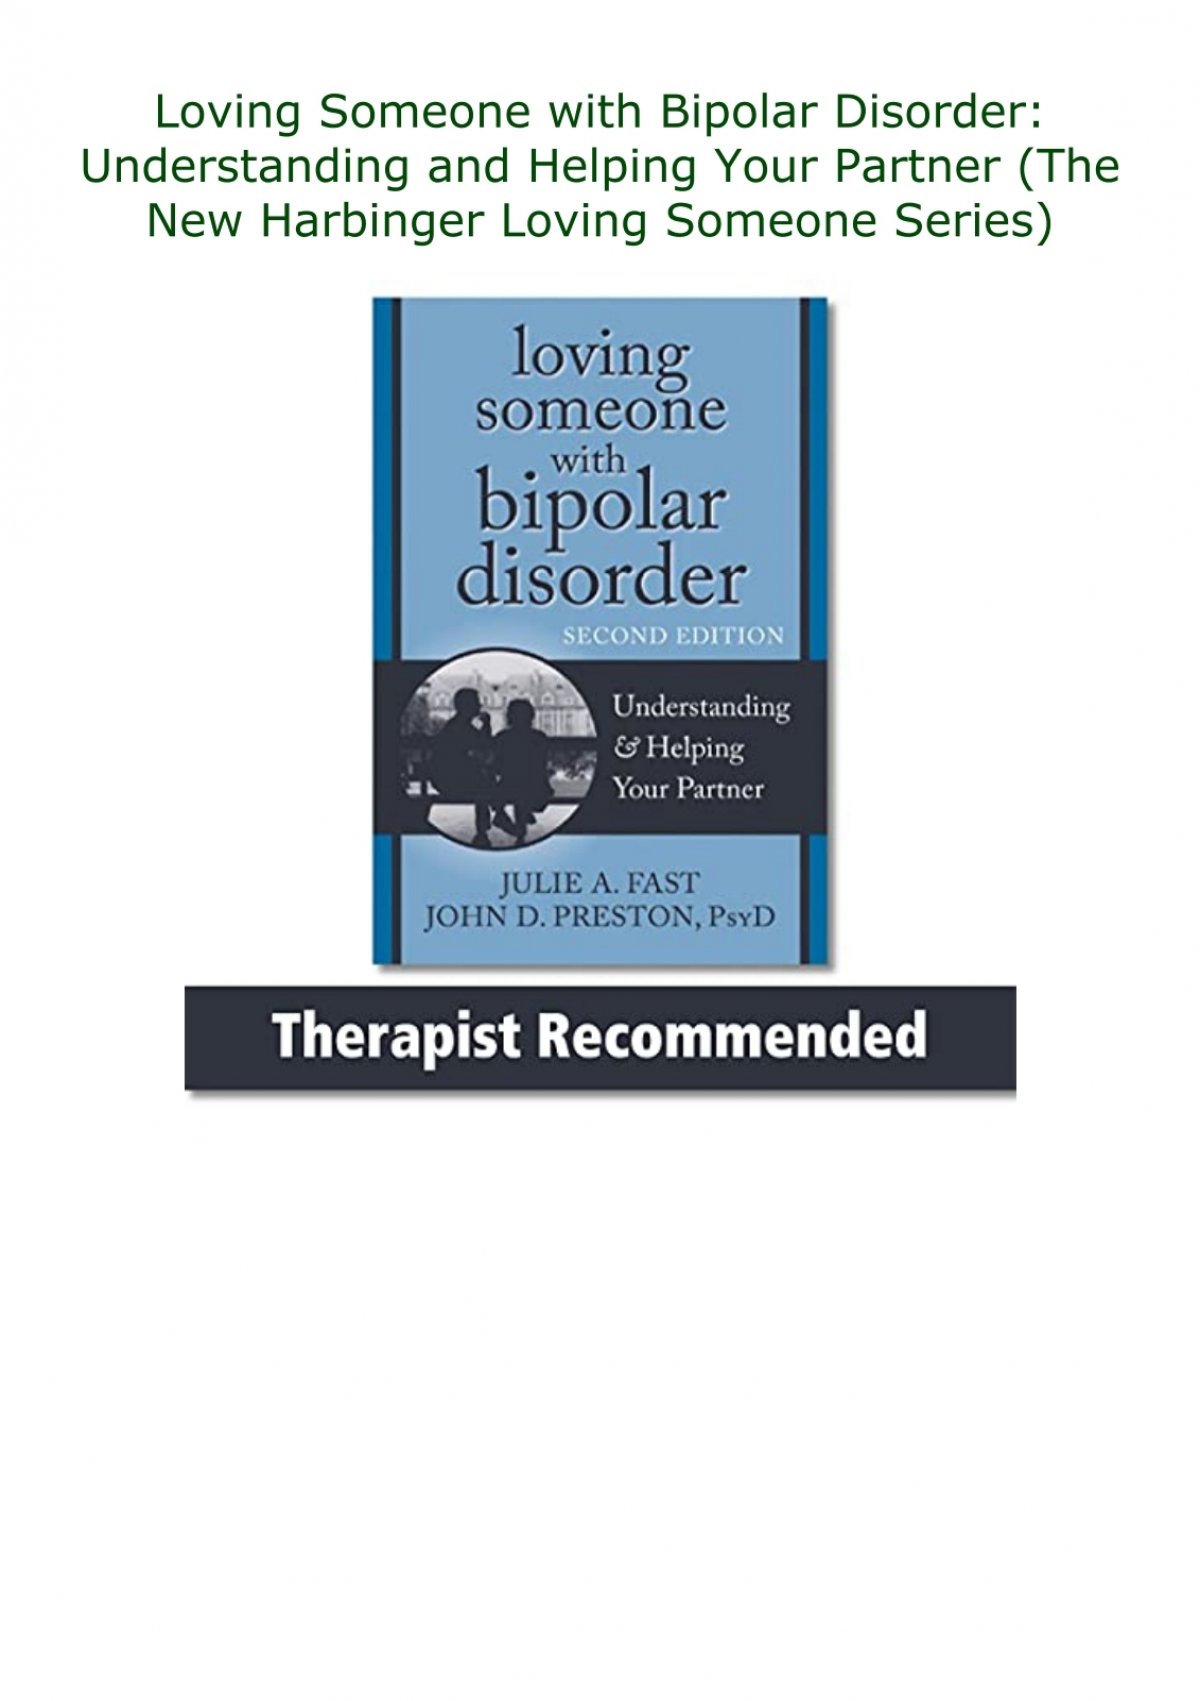 Download Pdf Loving Someone With Bipolar Disorder Understanding And Helping Your Partner The